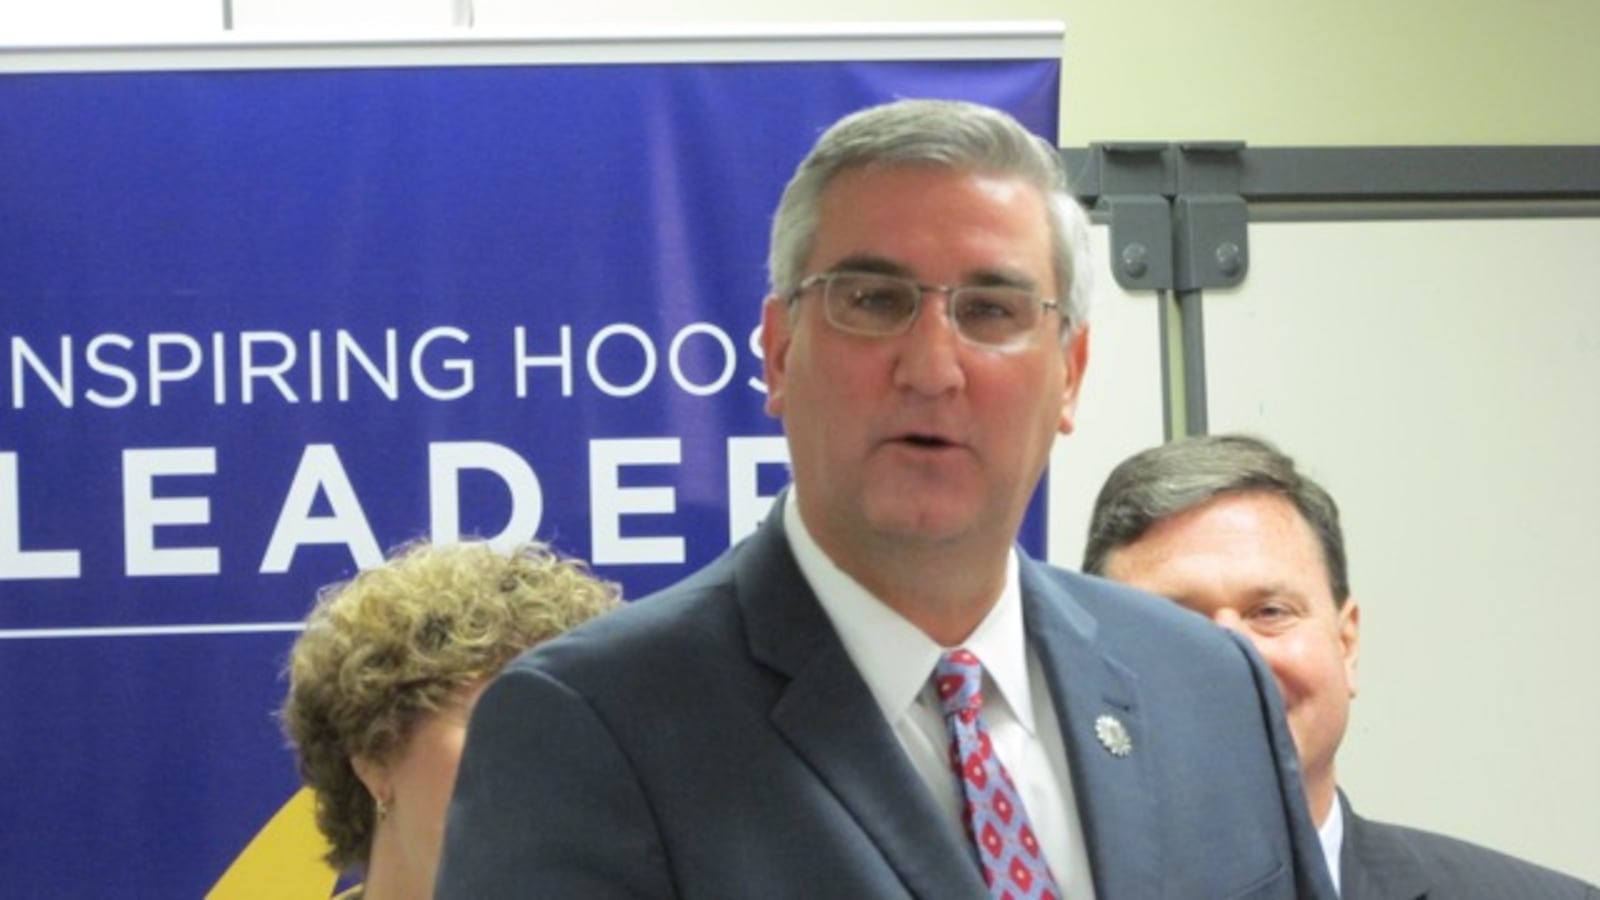 The 2016 Republican nominee for Indiana governor Eric Holcomb.